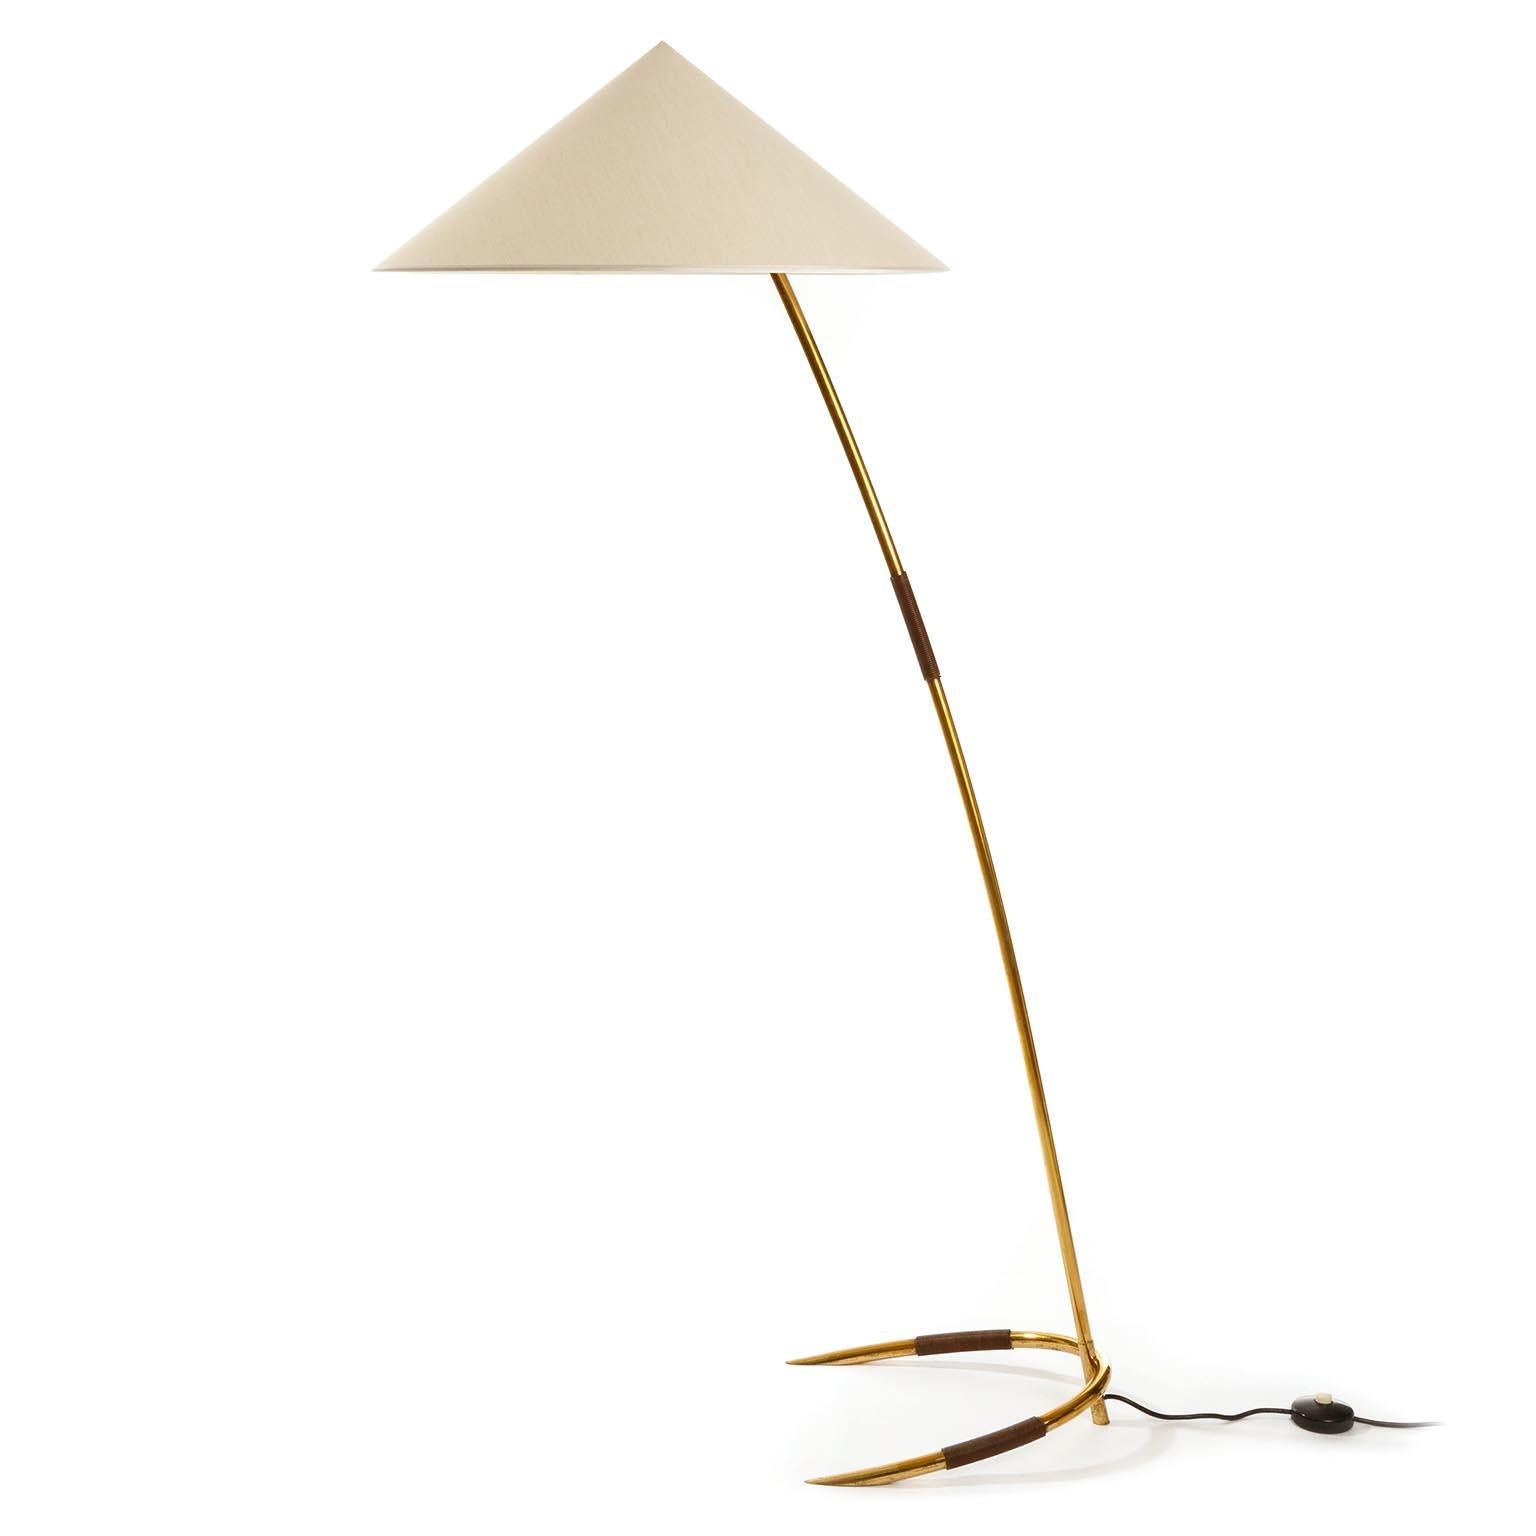 One of two gorgeous floor lights by Rupert Nikoll, Austria, manufactured in midcentury, circa 1960 (late 1950s or early 1960s).
Only one light is available.
A cone shaped and ivory toned lamp shade sits on a solid brass stand with a plastic string